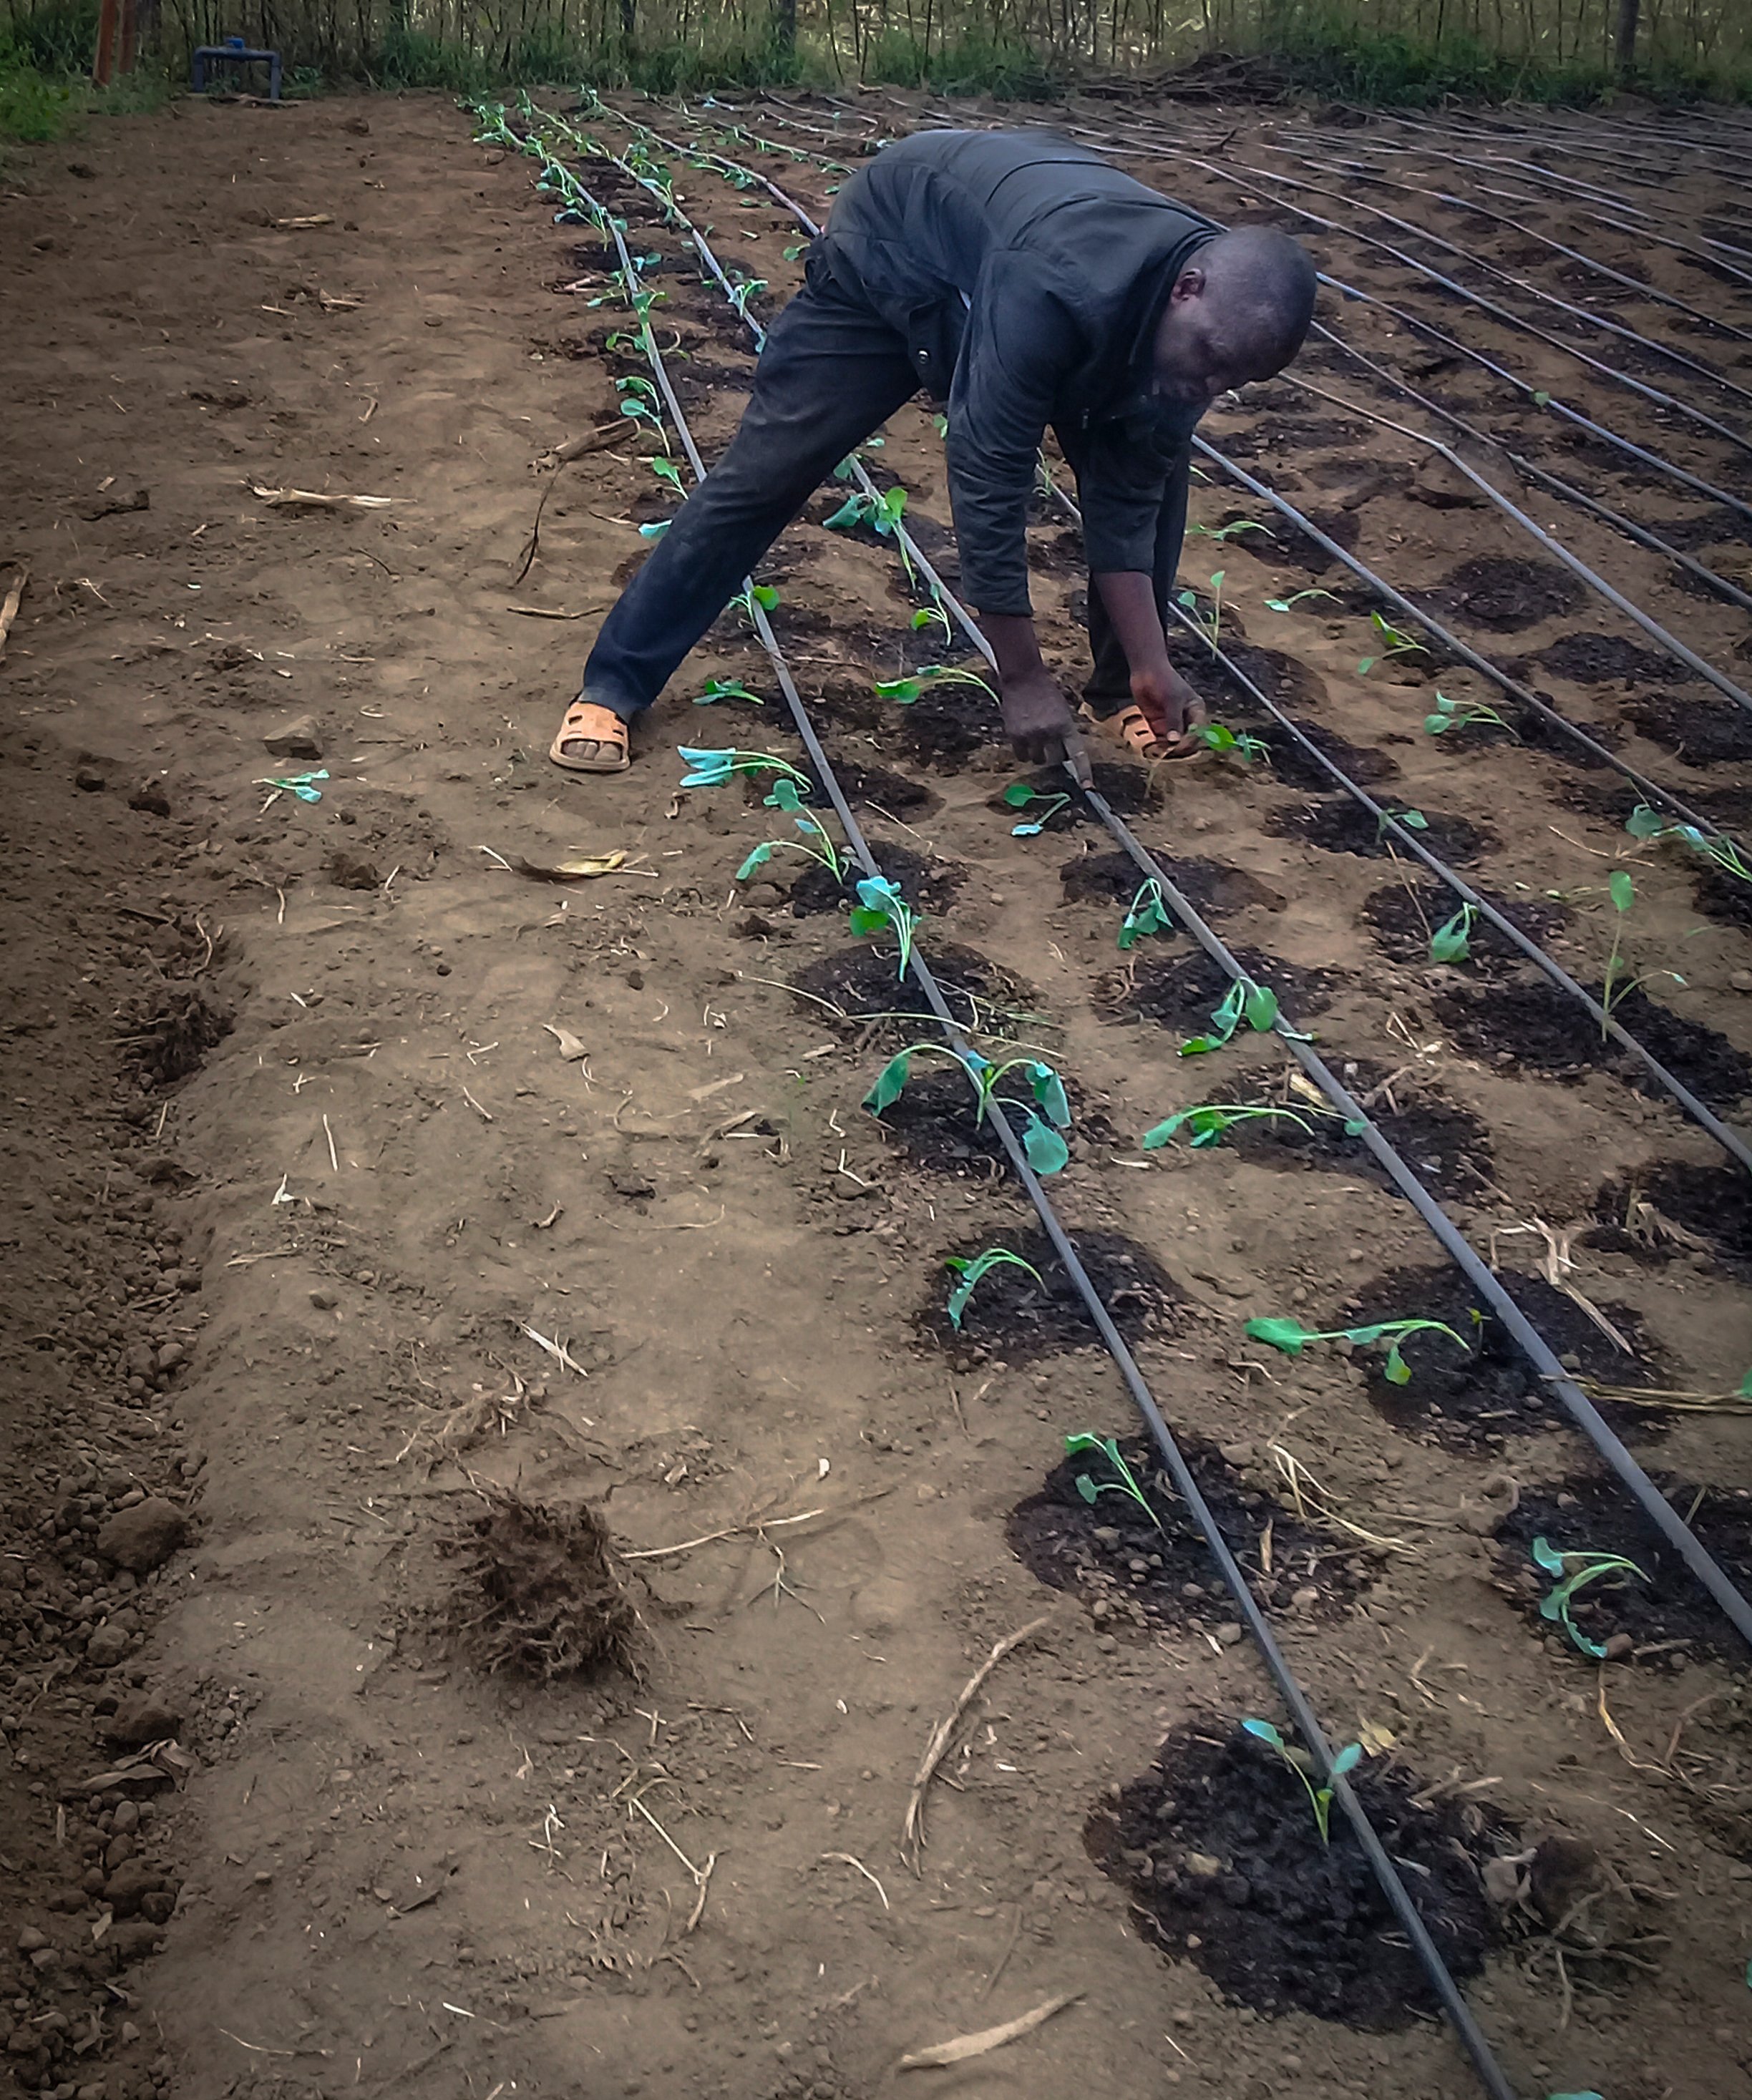 Josphat sets the hoses for drip irrigation at NECC